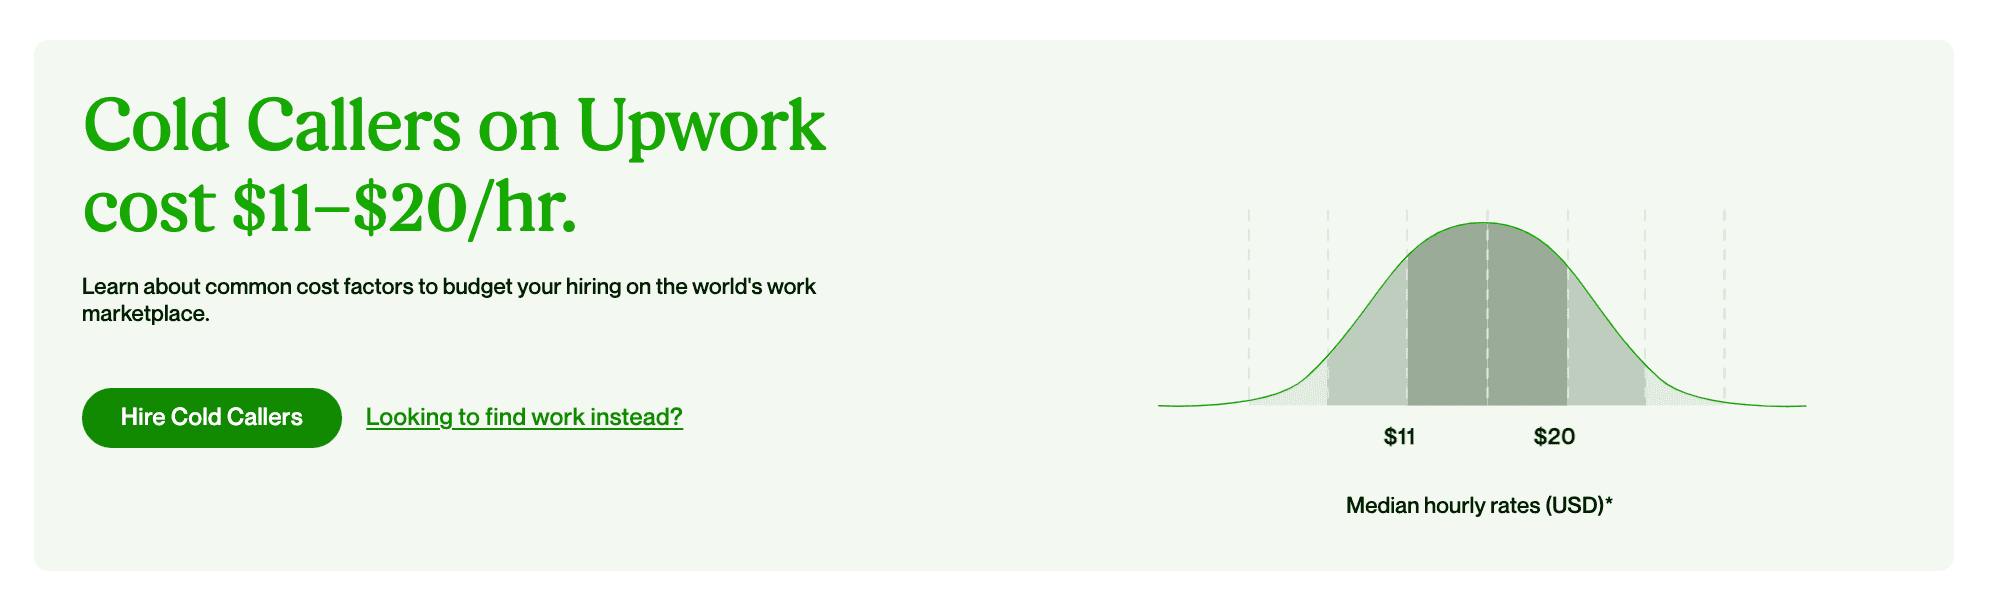 price cold callers upwork - image25.png